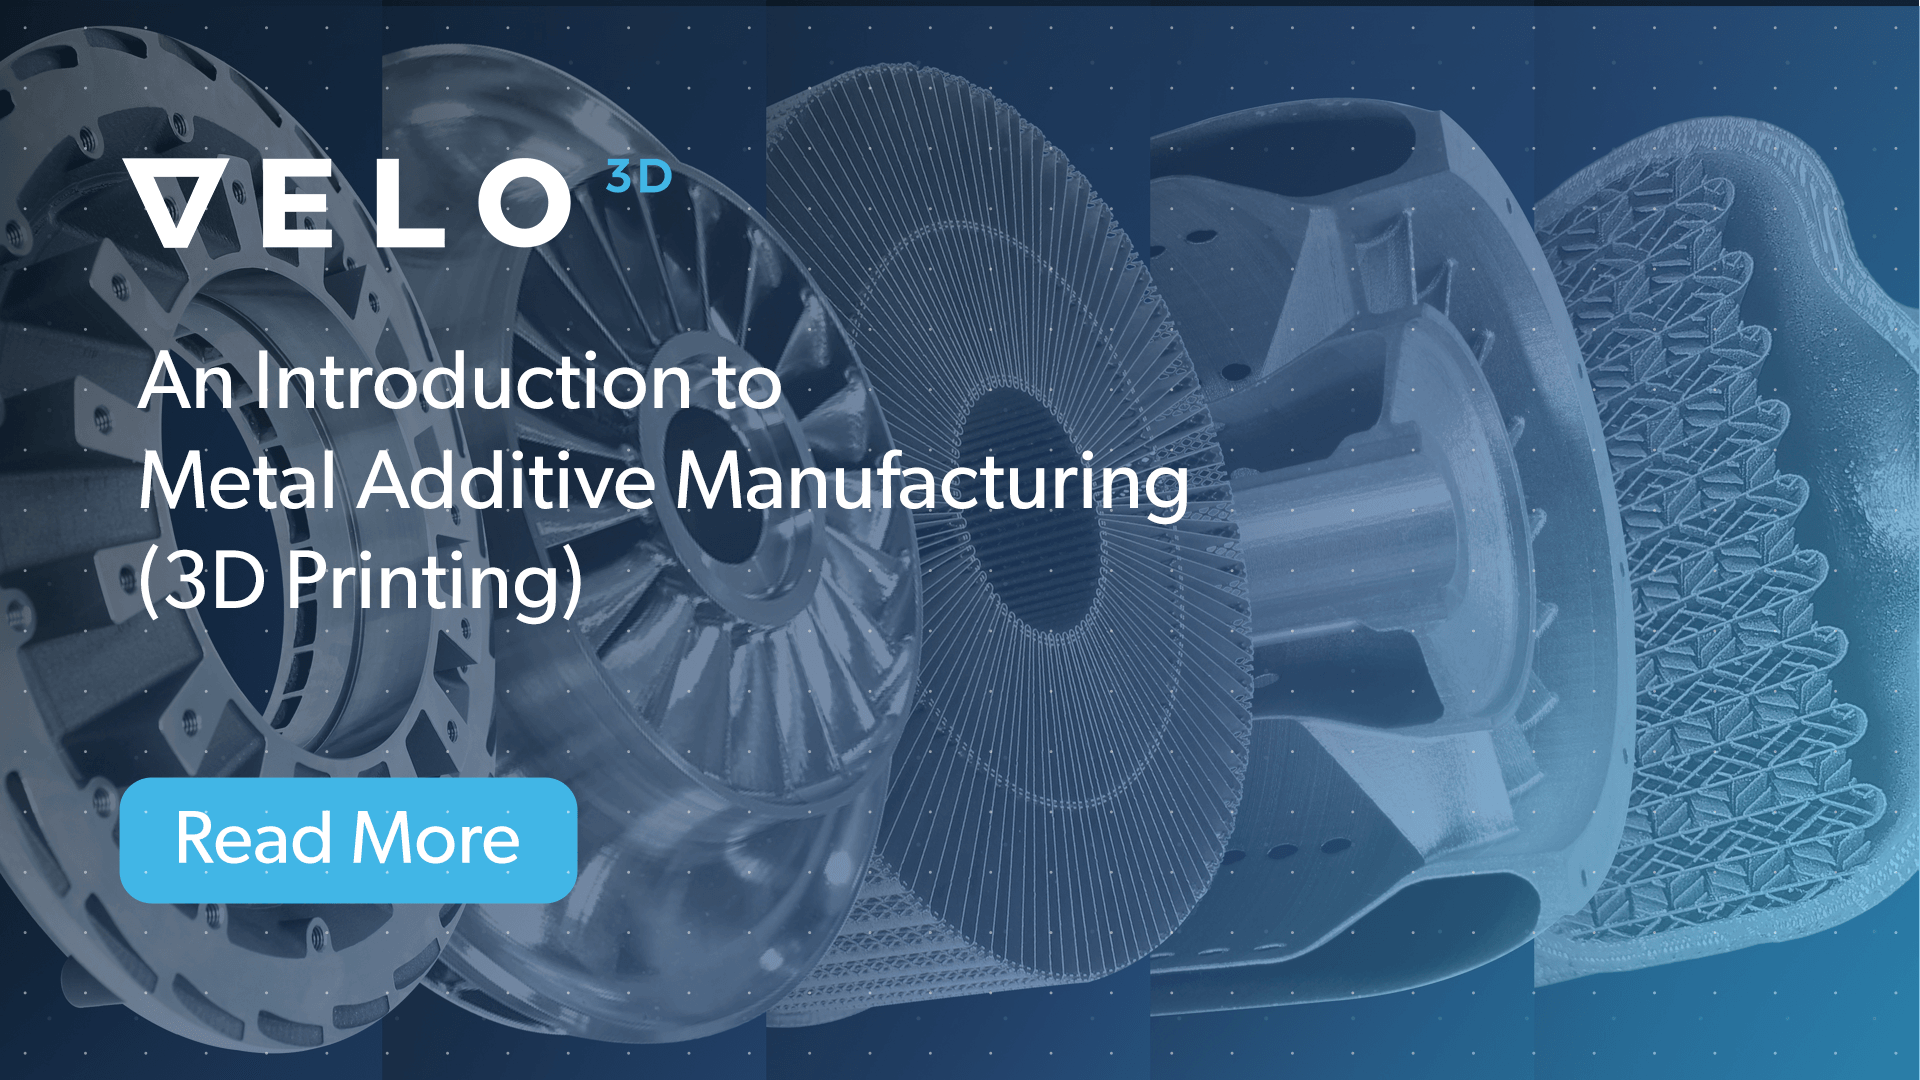 An Introduction to Metal Additive Manufacturing (3D Printing)